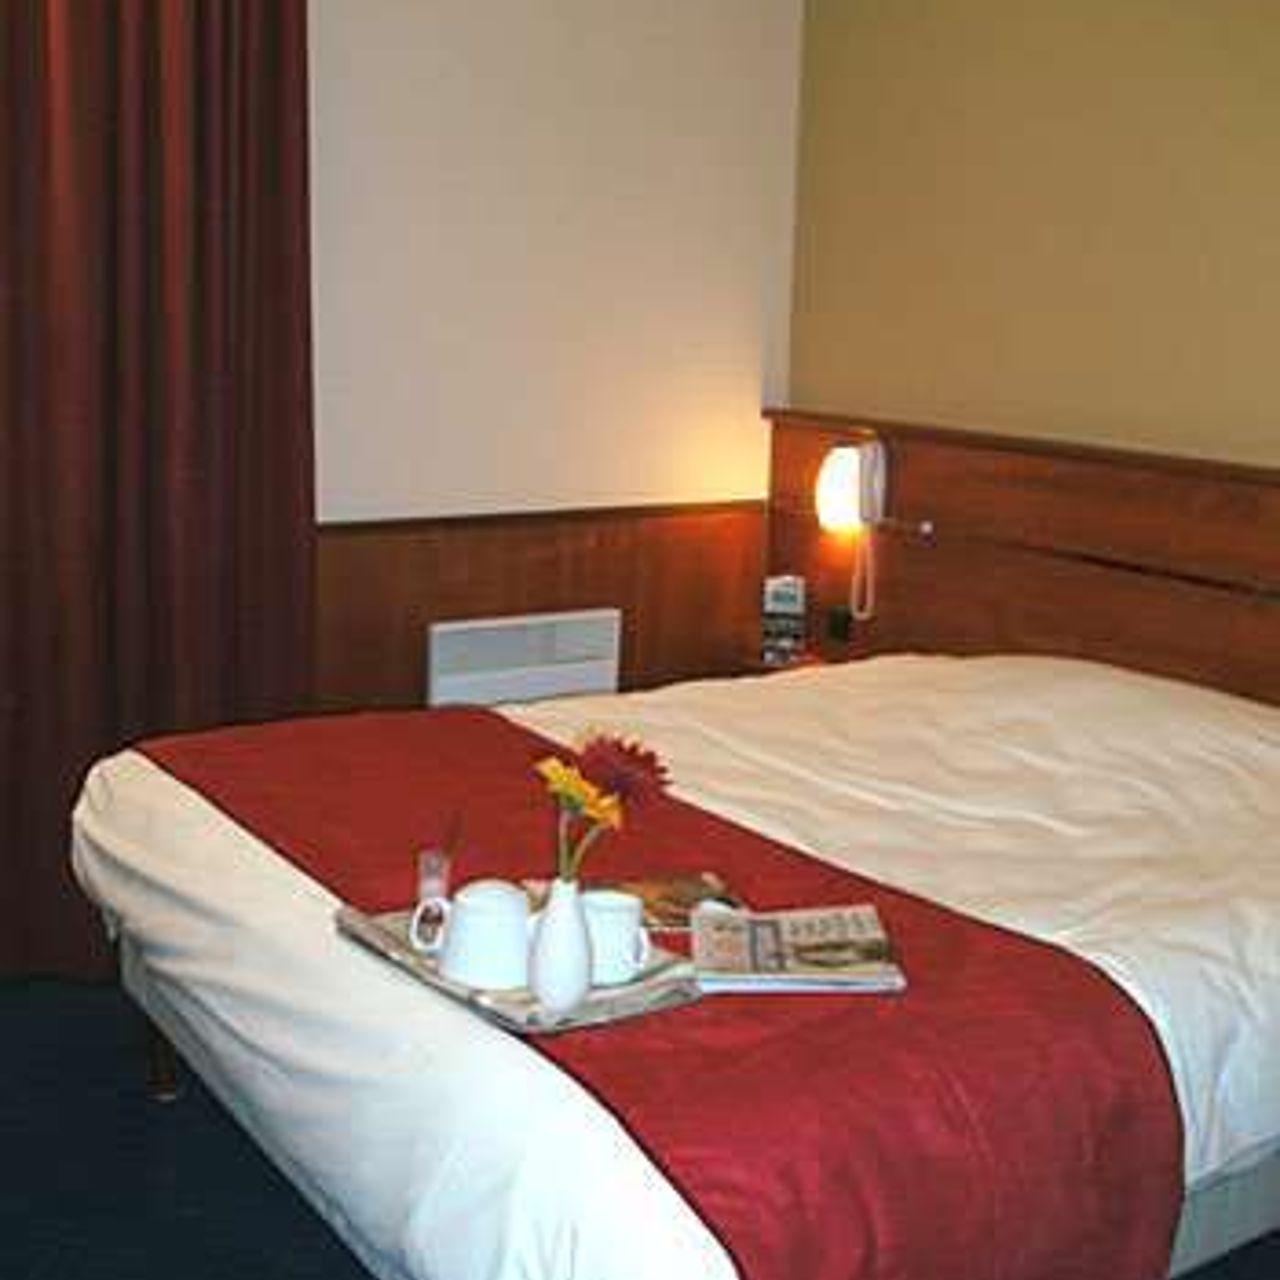 Brit Hotel Nantes Beaujoire - L'Amandine - Great prices at HOTEL INFO